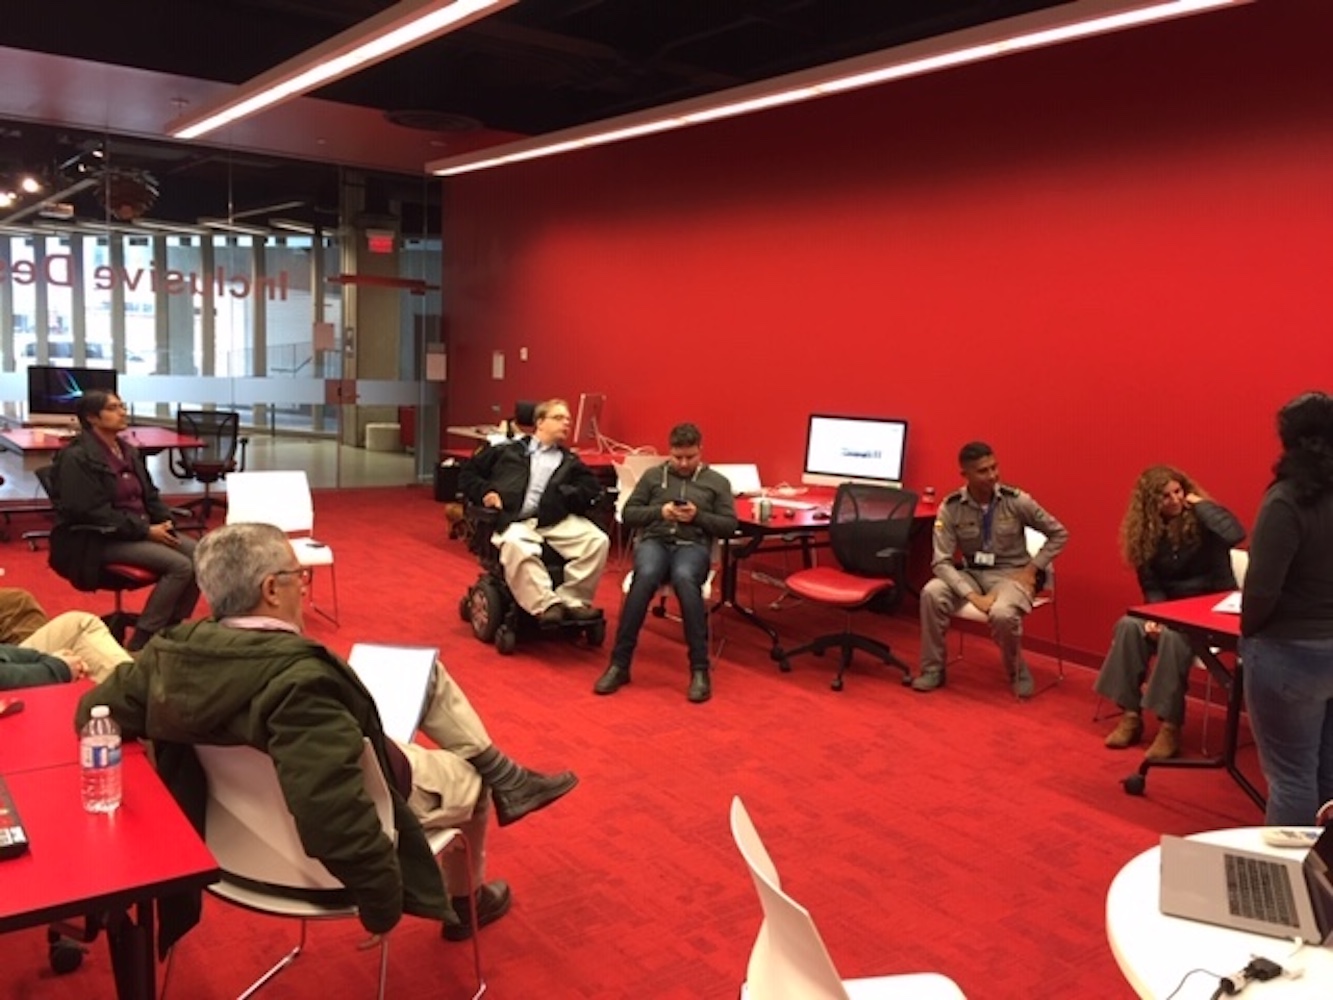 A photo of people sitting in a circle in a room with a red wall and red carpet.